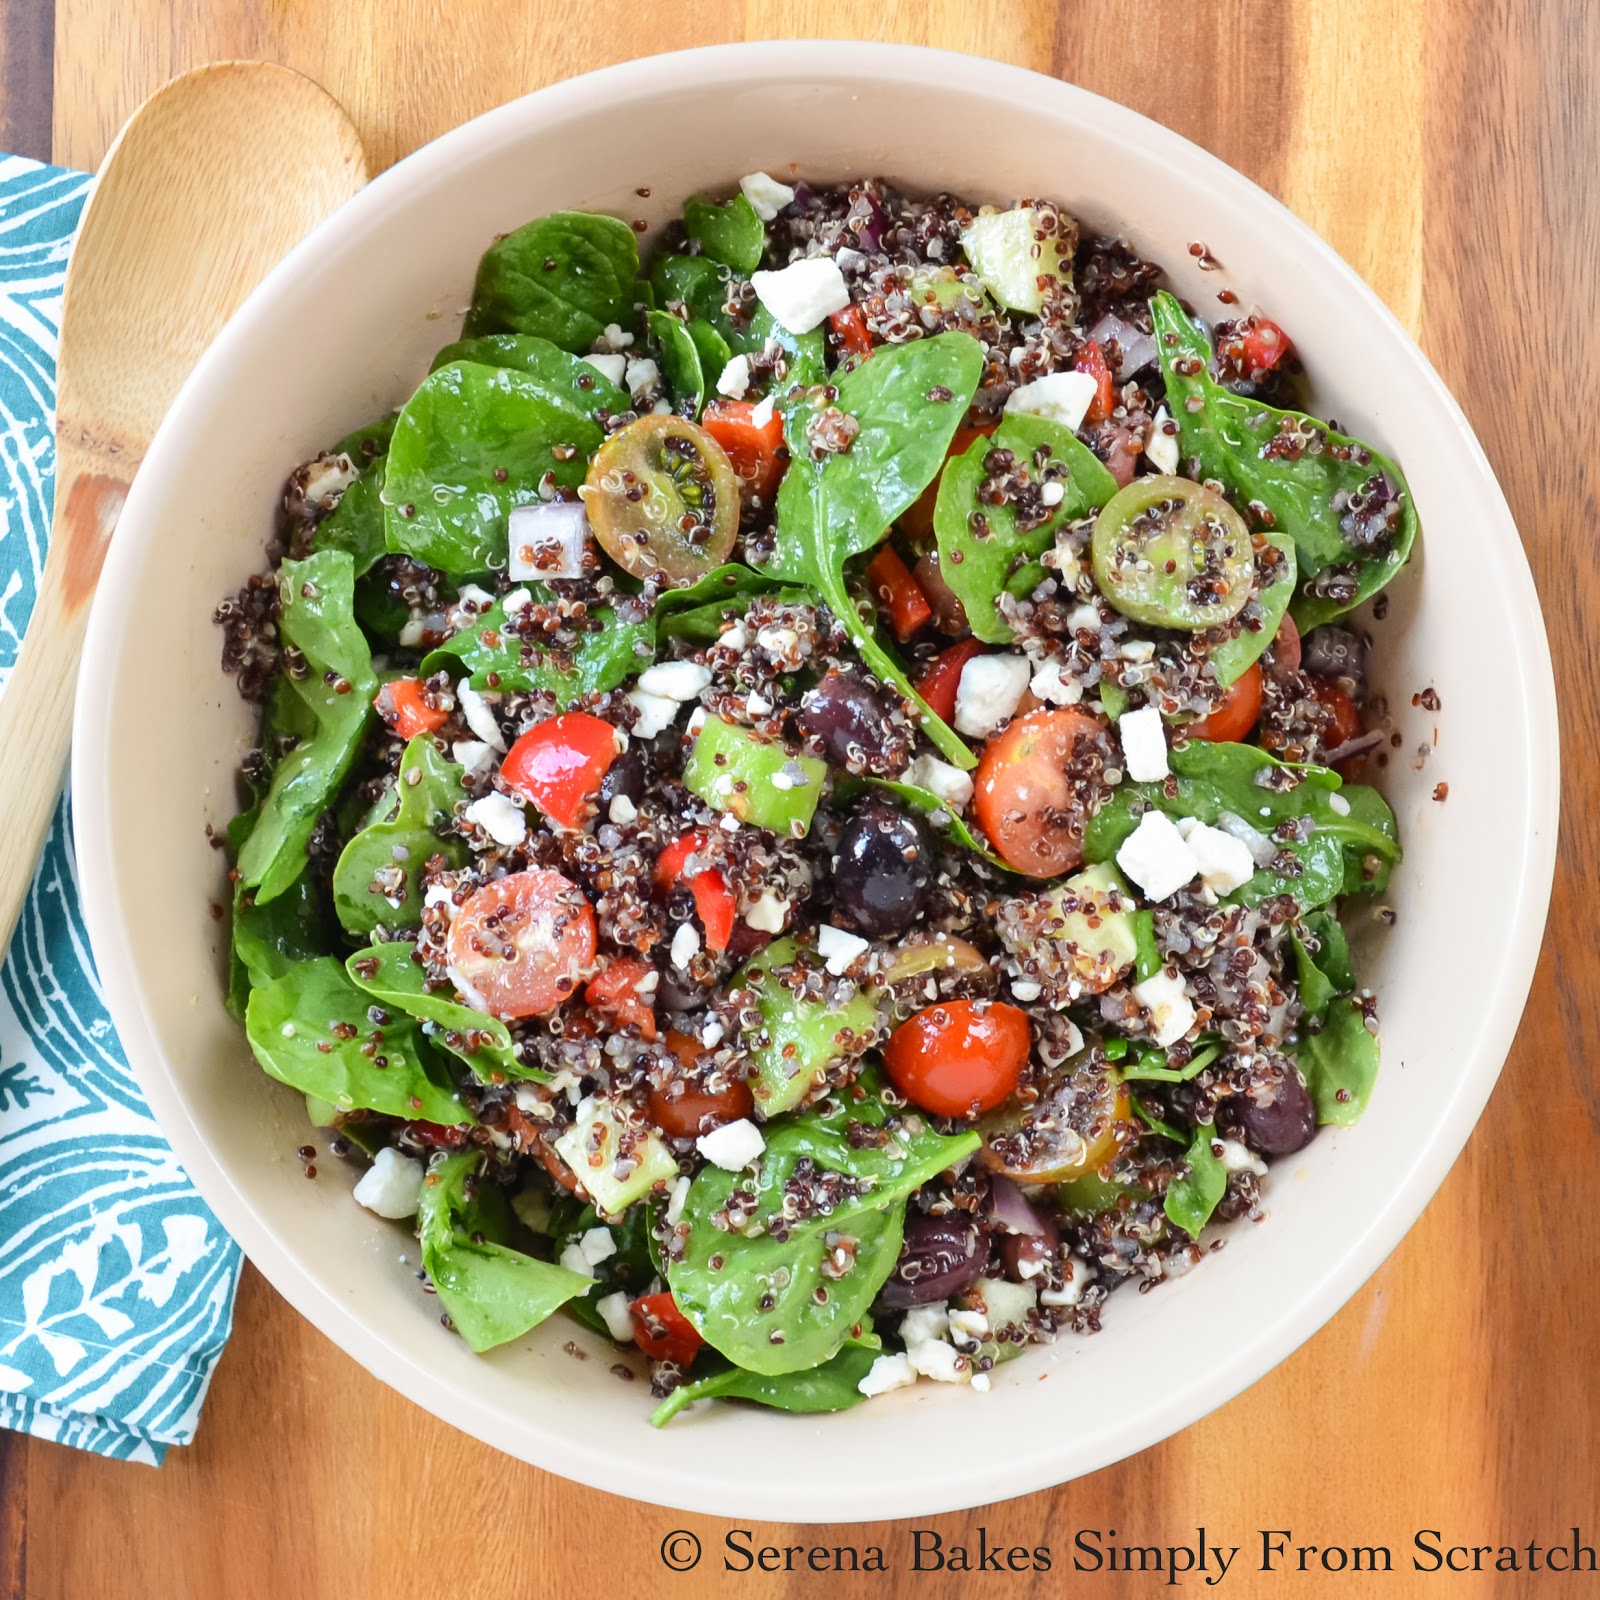 Greek Quinoa Salad. Healthy and easy to make! Perfect as a side or main dish! www.serenabakessimplyfromscratch.com